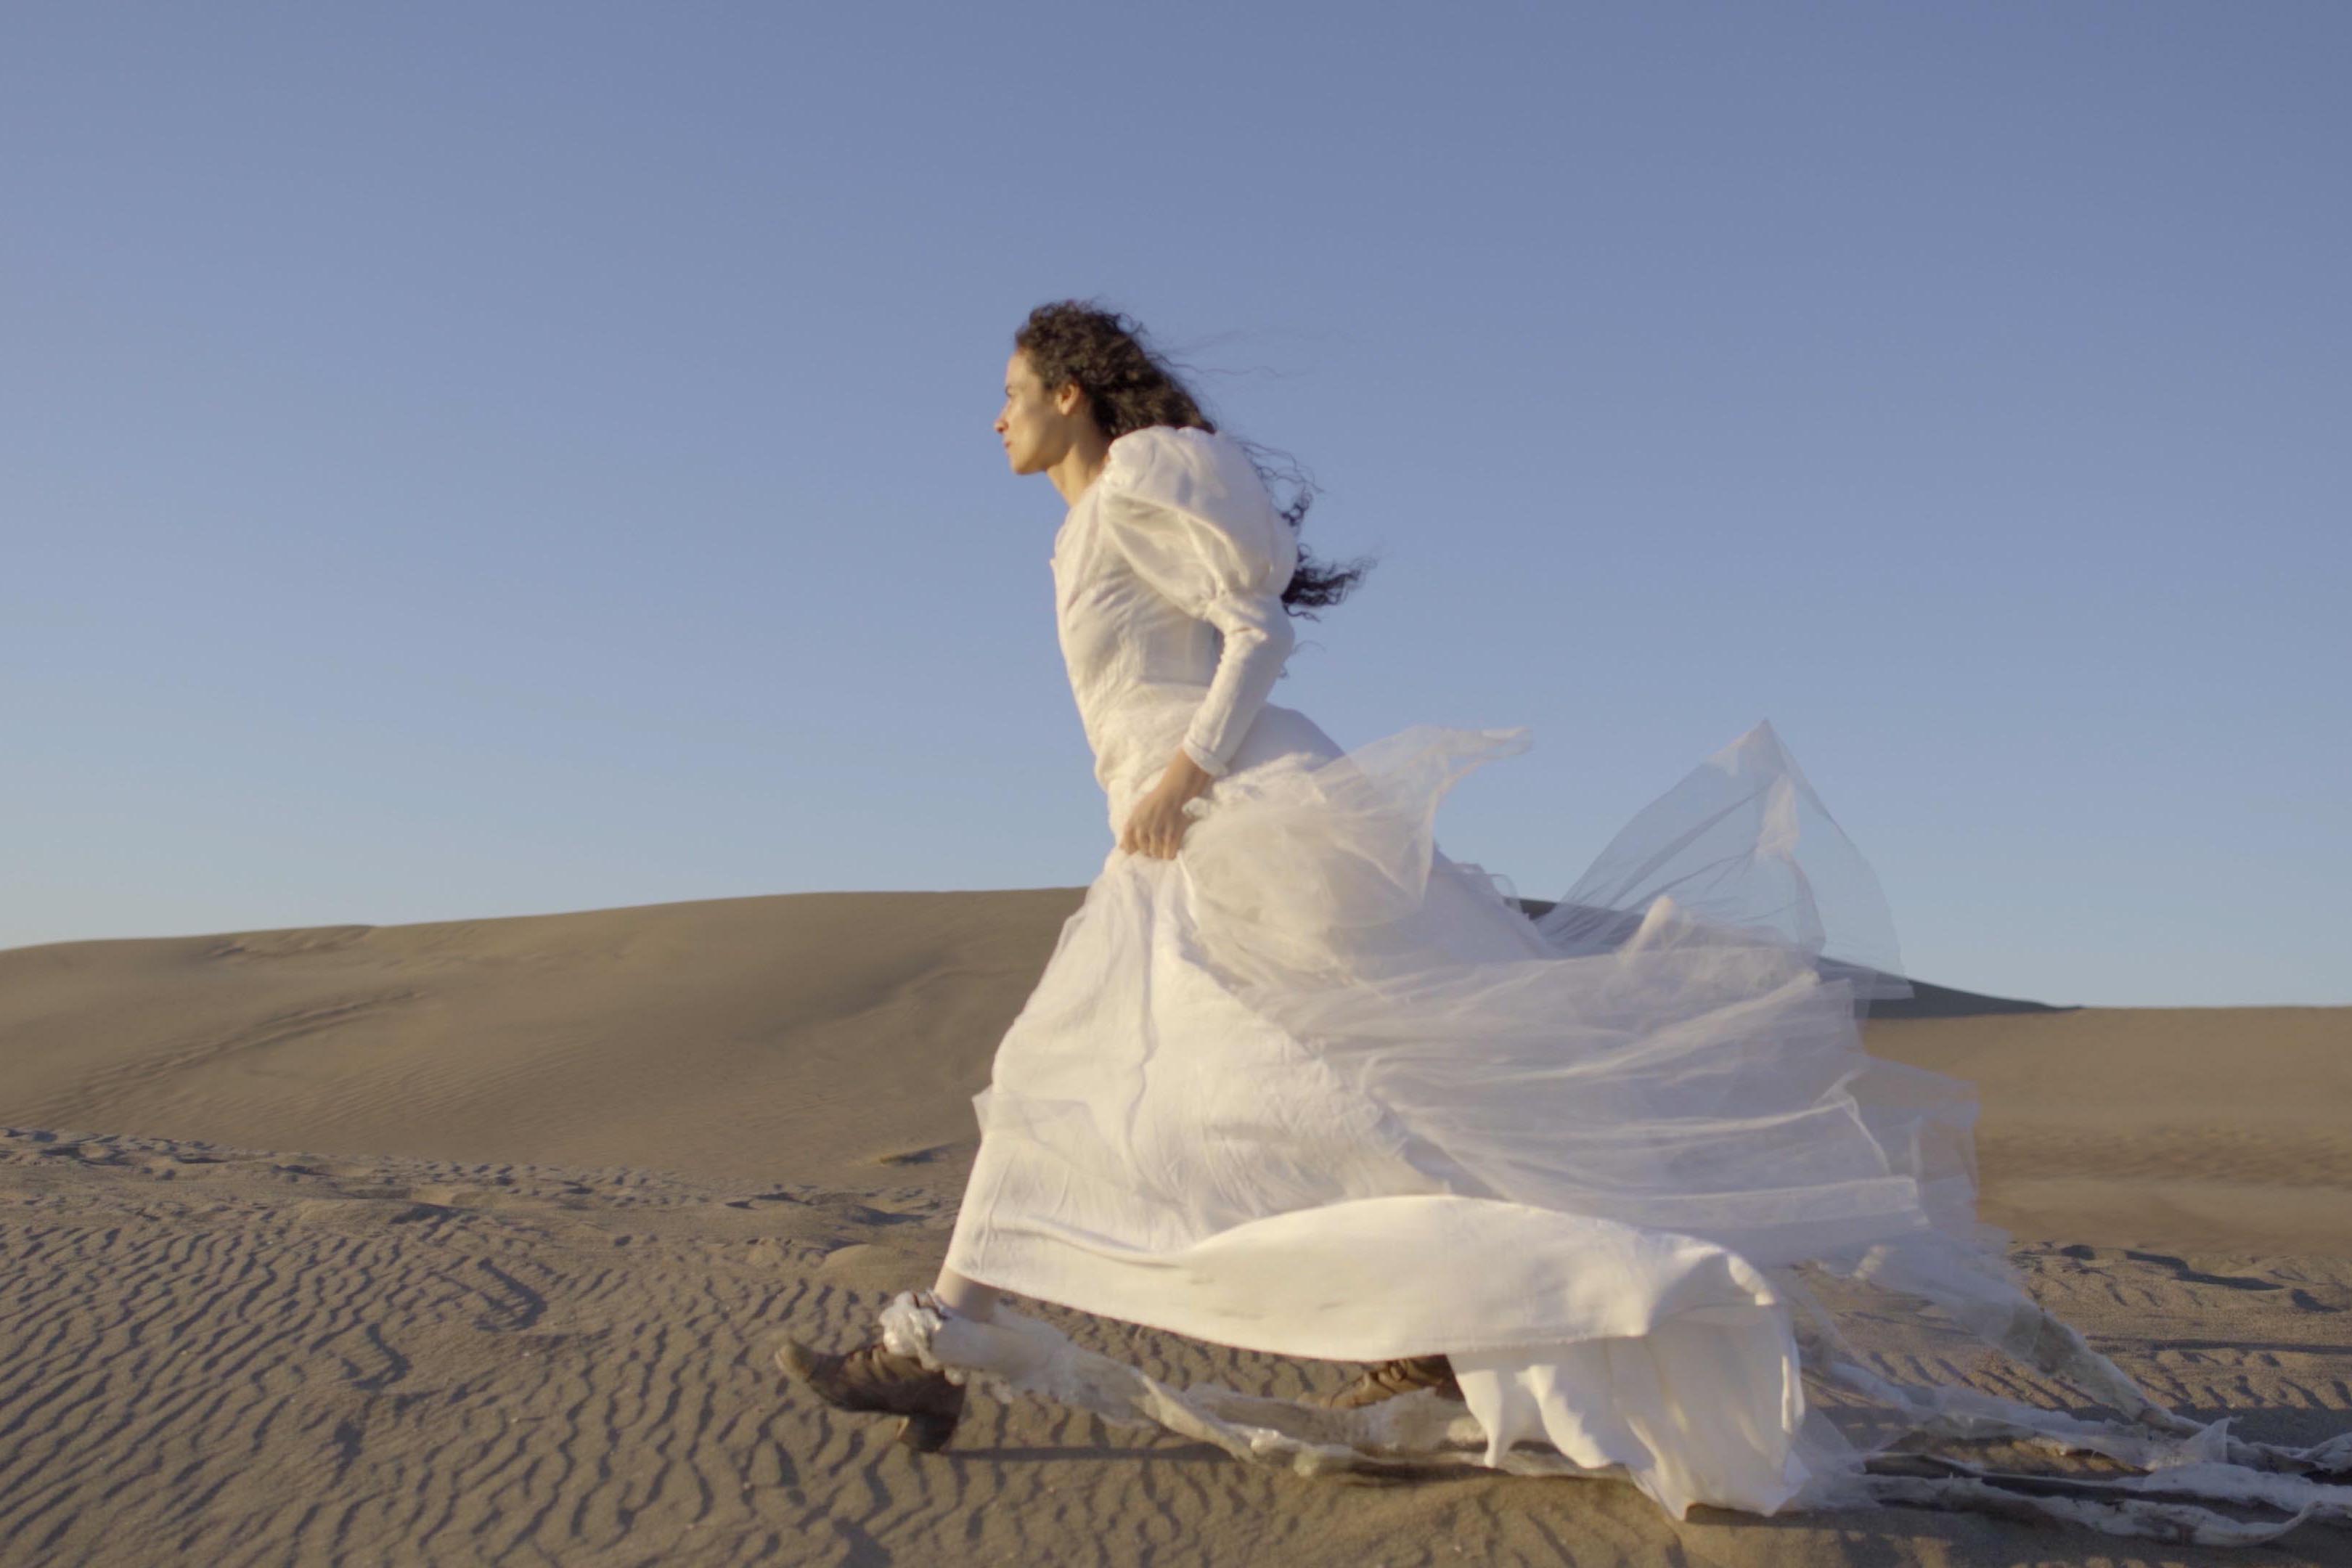 A person with long curly black hair strides through the desert wearing a white dress and brown heeled boots. Strips of white material are tied around their ankles and drag behind them as they walk.